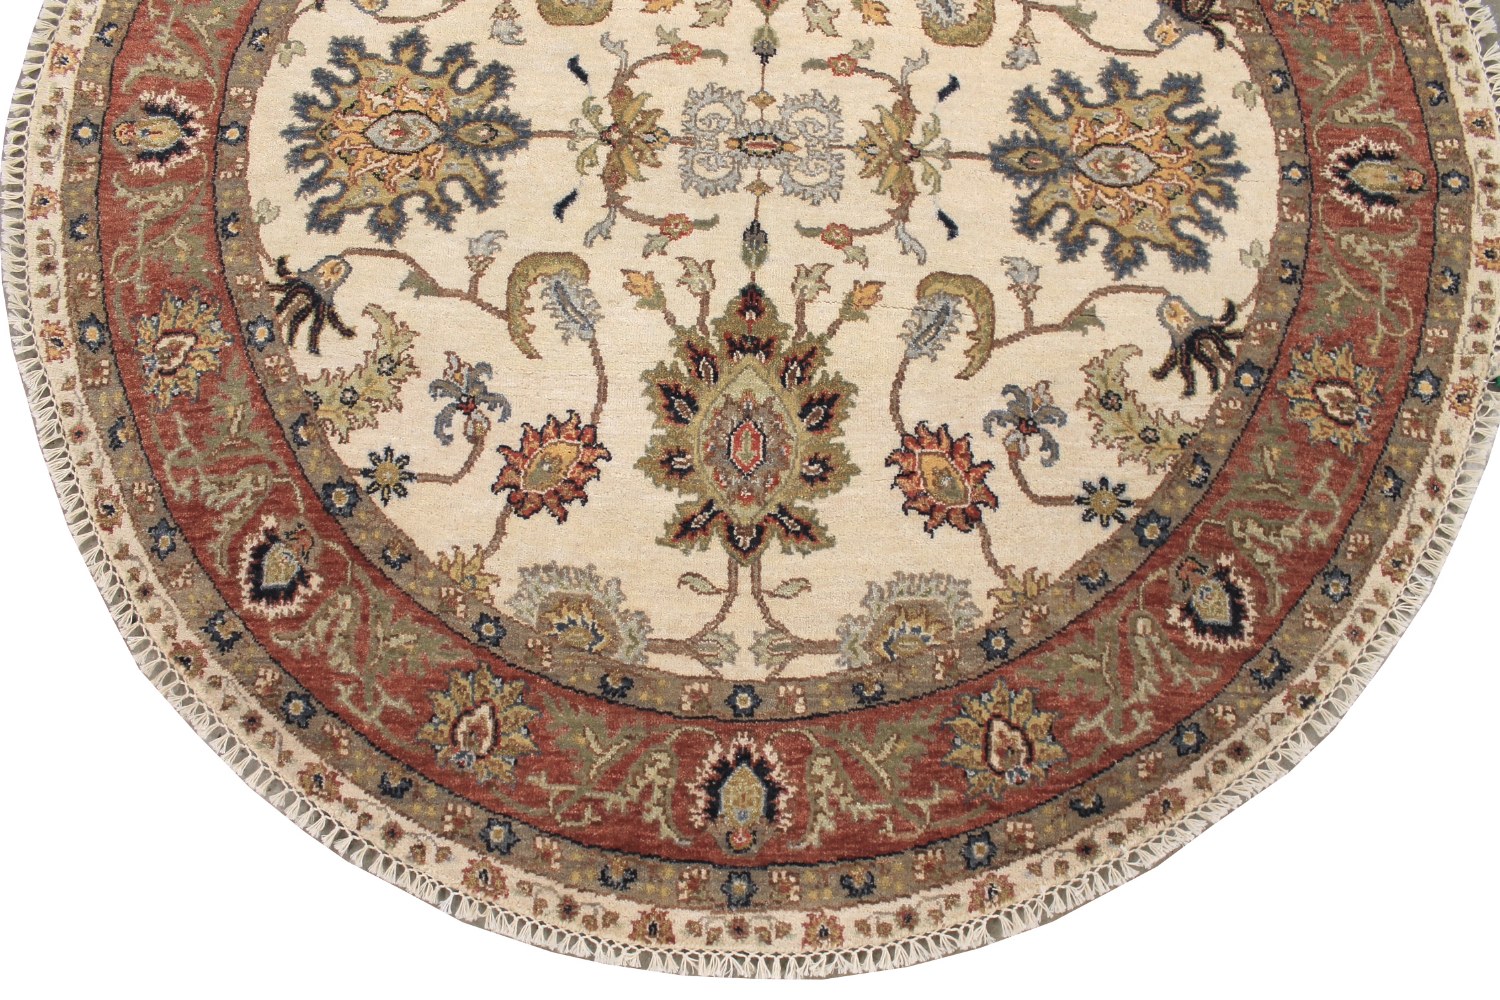 5 ft. Round & Square Traditional Hand Knotted Wool Area Rug - MR028583